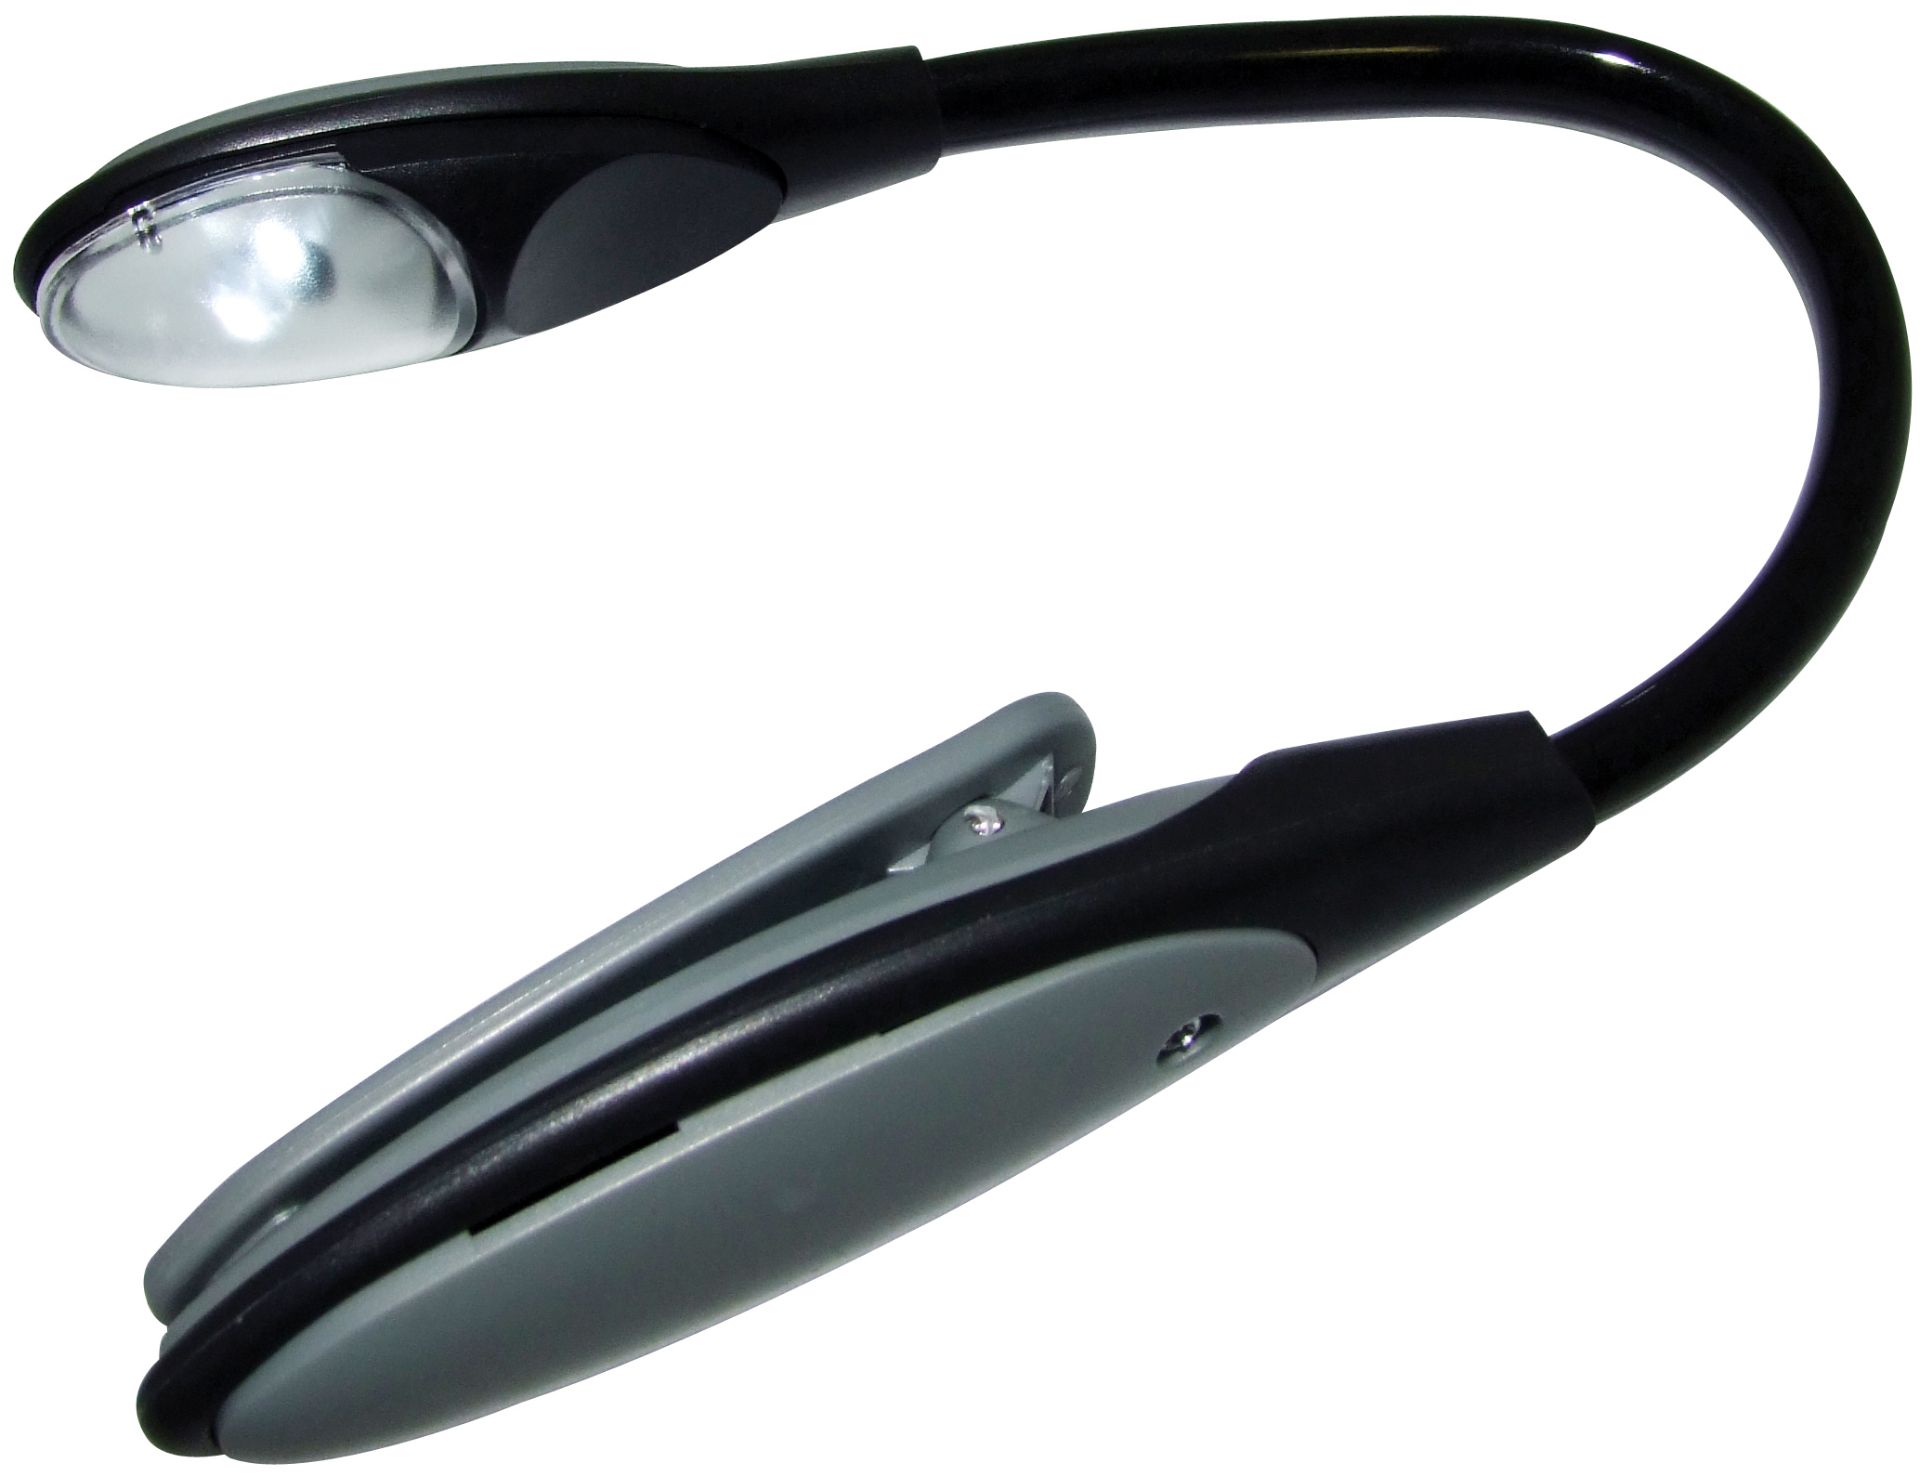 V Brand New Flexible LED Clip Light X 2 YOUR BID PRICE TO BE MULTIPLIED BY TWO